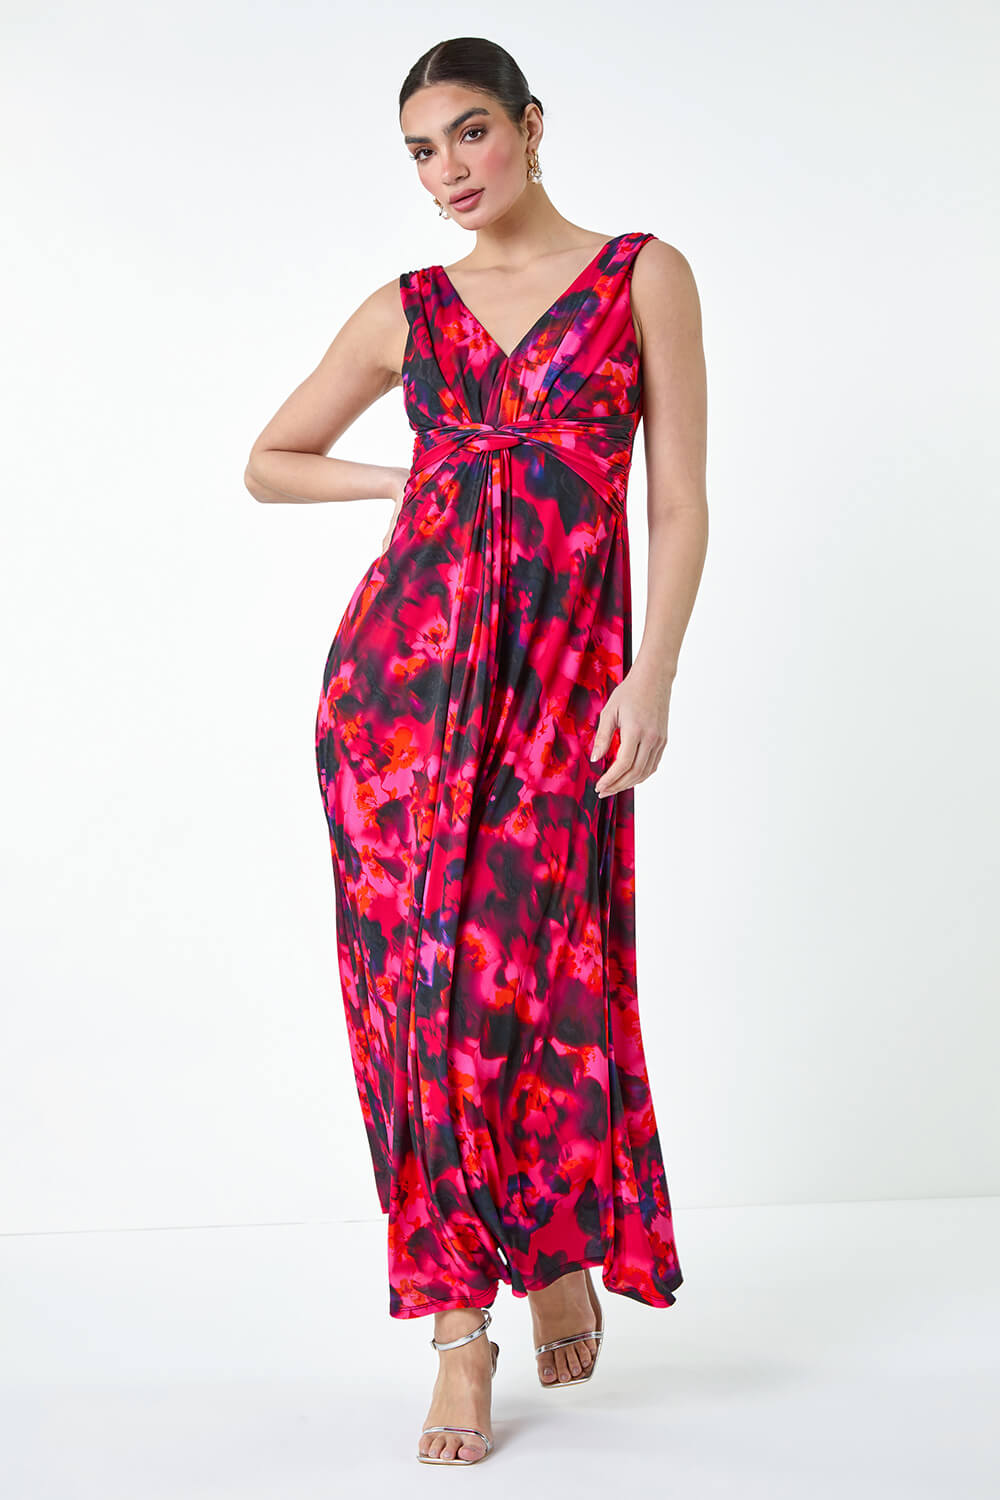 CERISE Floral Knot Front Maxi Dress, Image 3 of 5